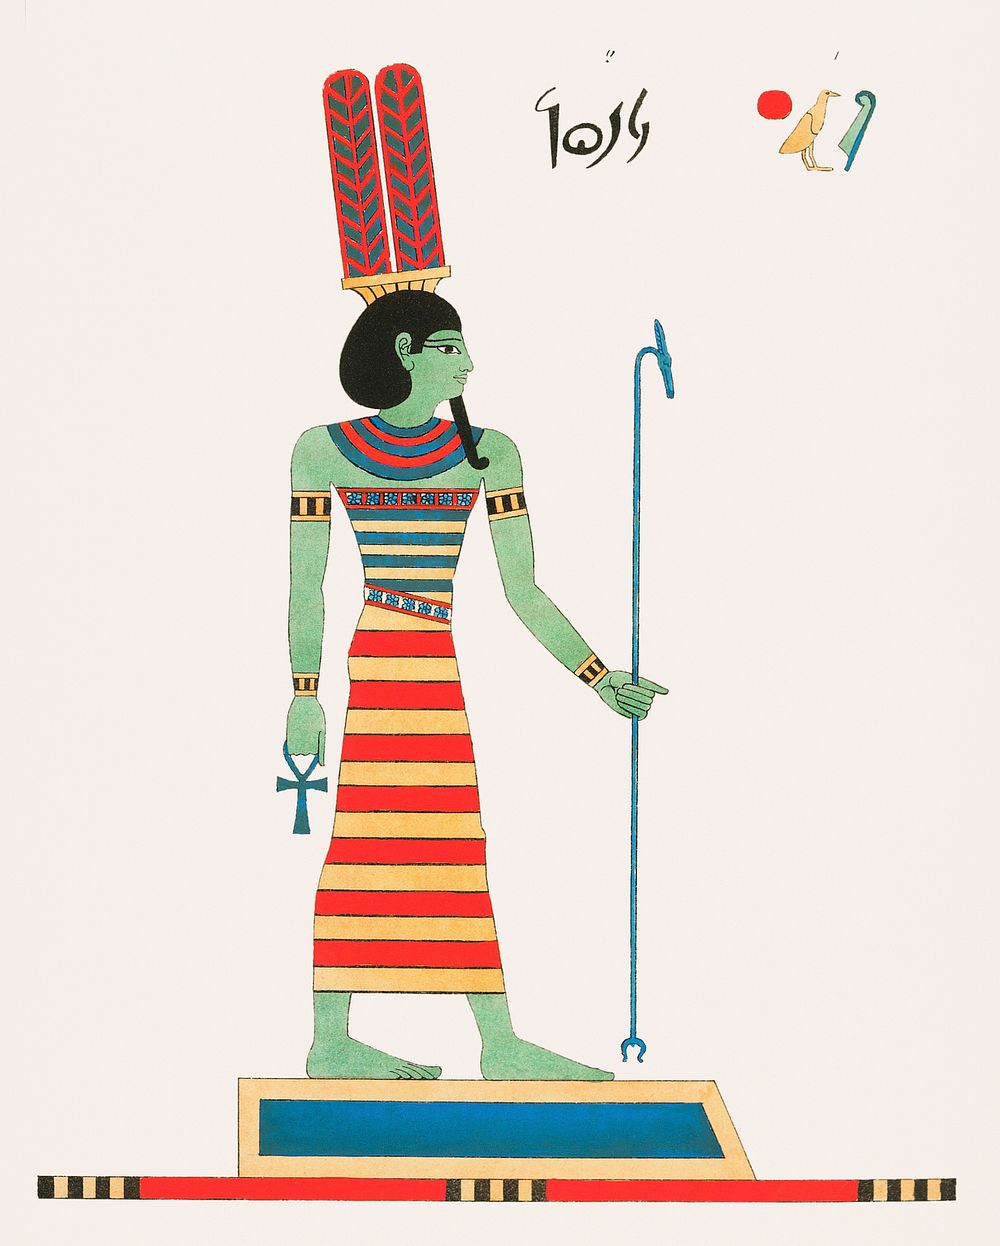 Amun illustration from Pantheon Egyptien (1823-1825) by Leon Jean Joseph Dubois (1780-1846). Original from The New York…